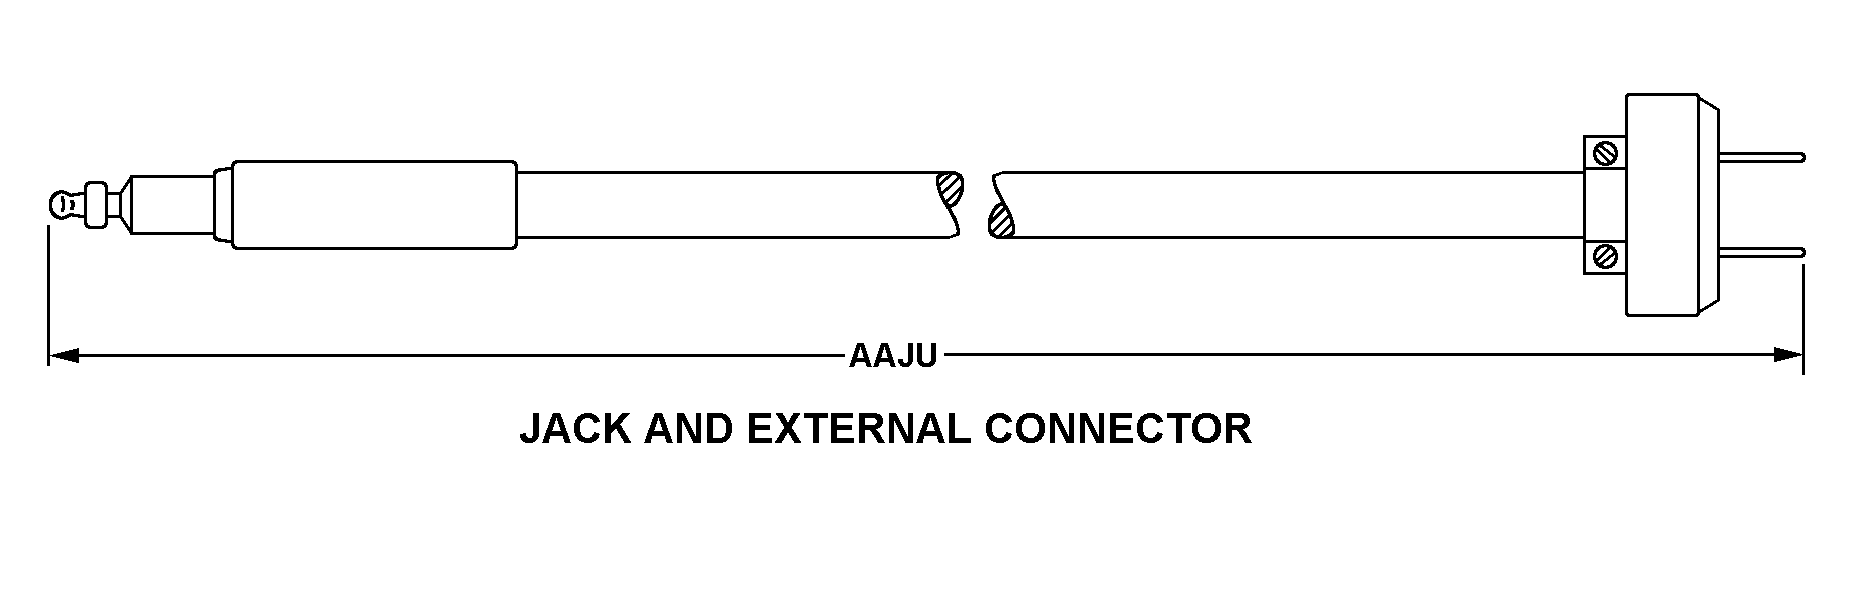 JACK AND EXTERNAL CONNECTOR style nsn 6150-01-208-7489